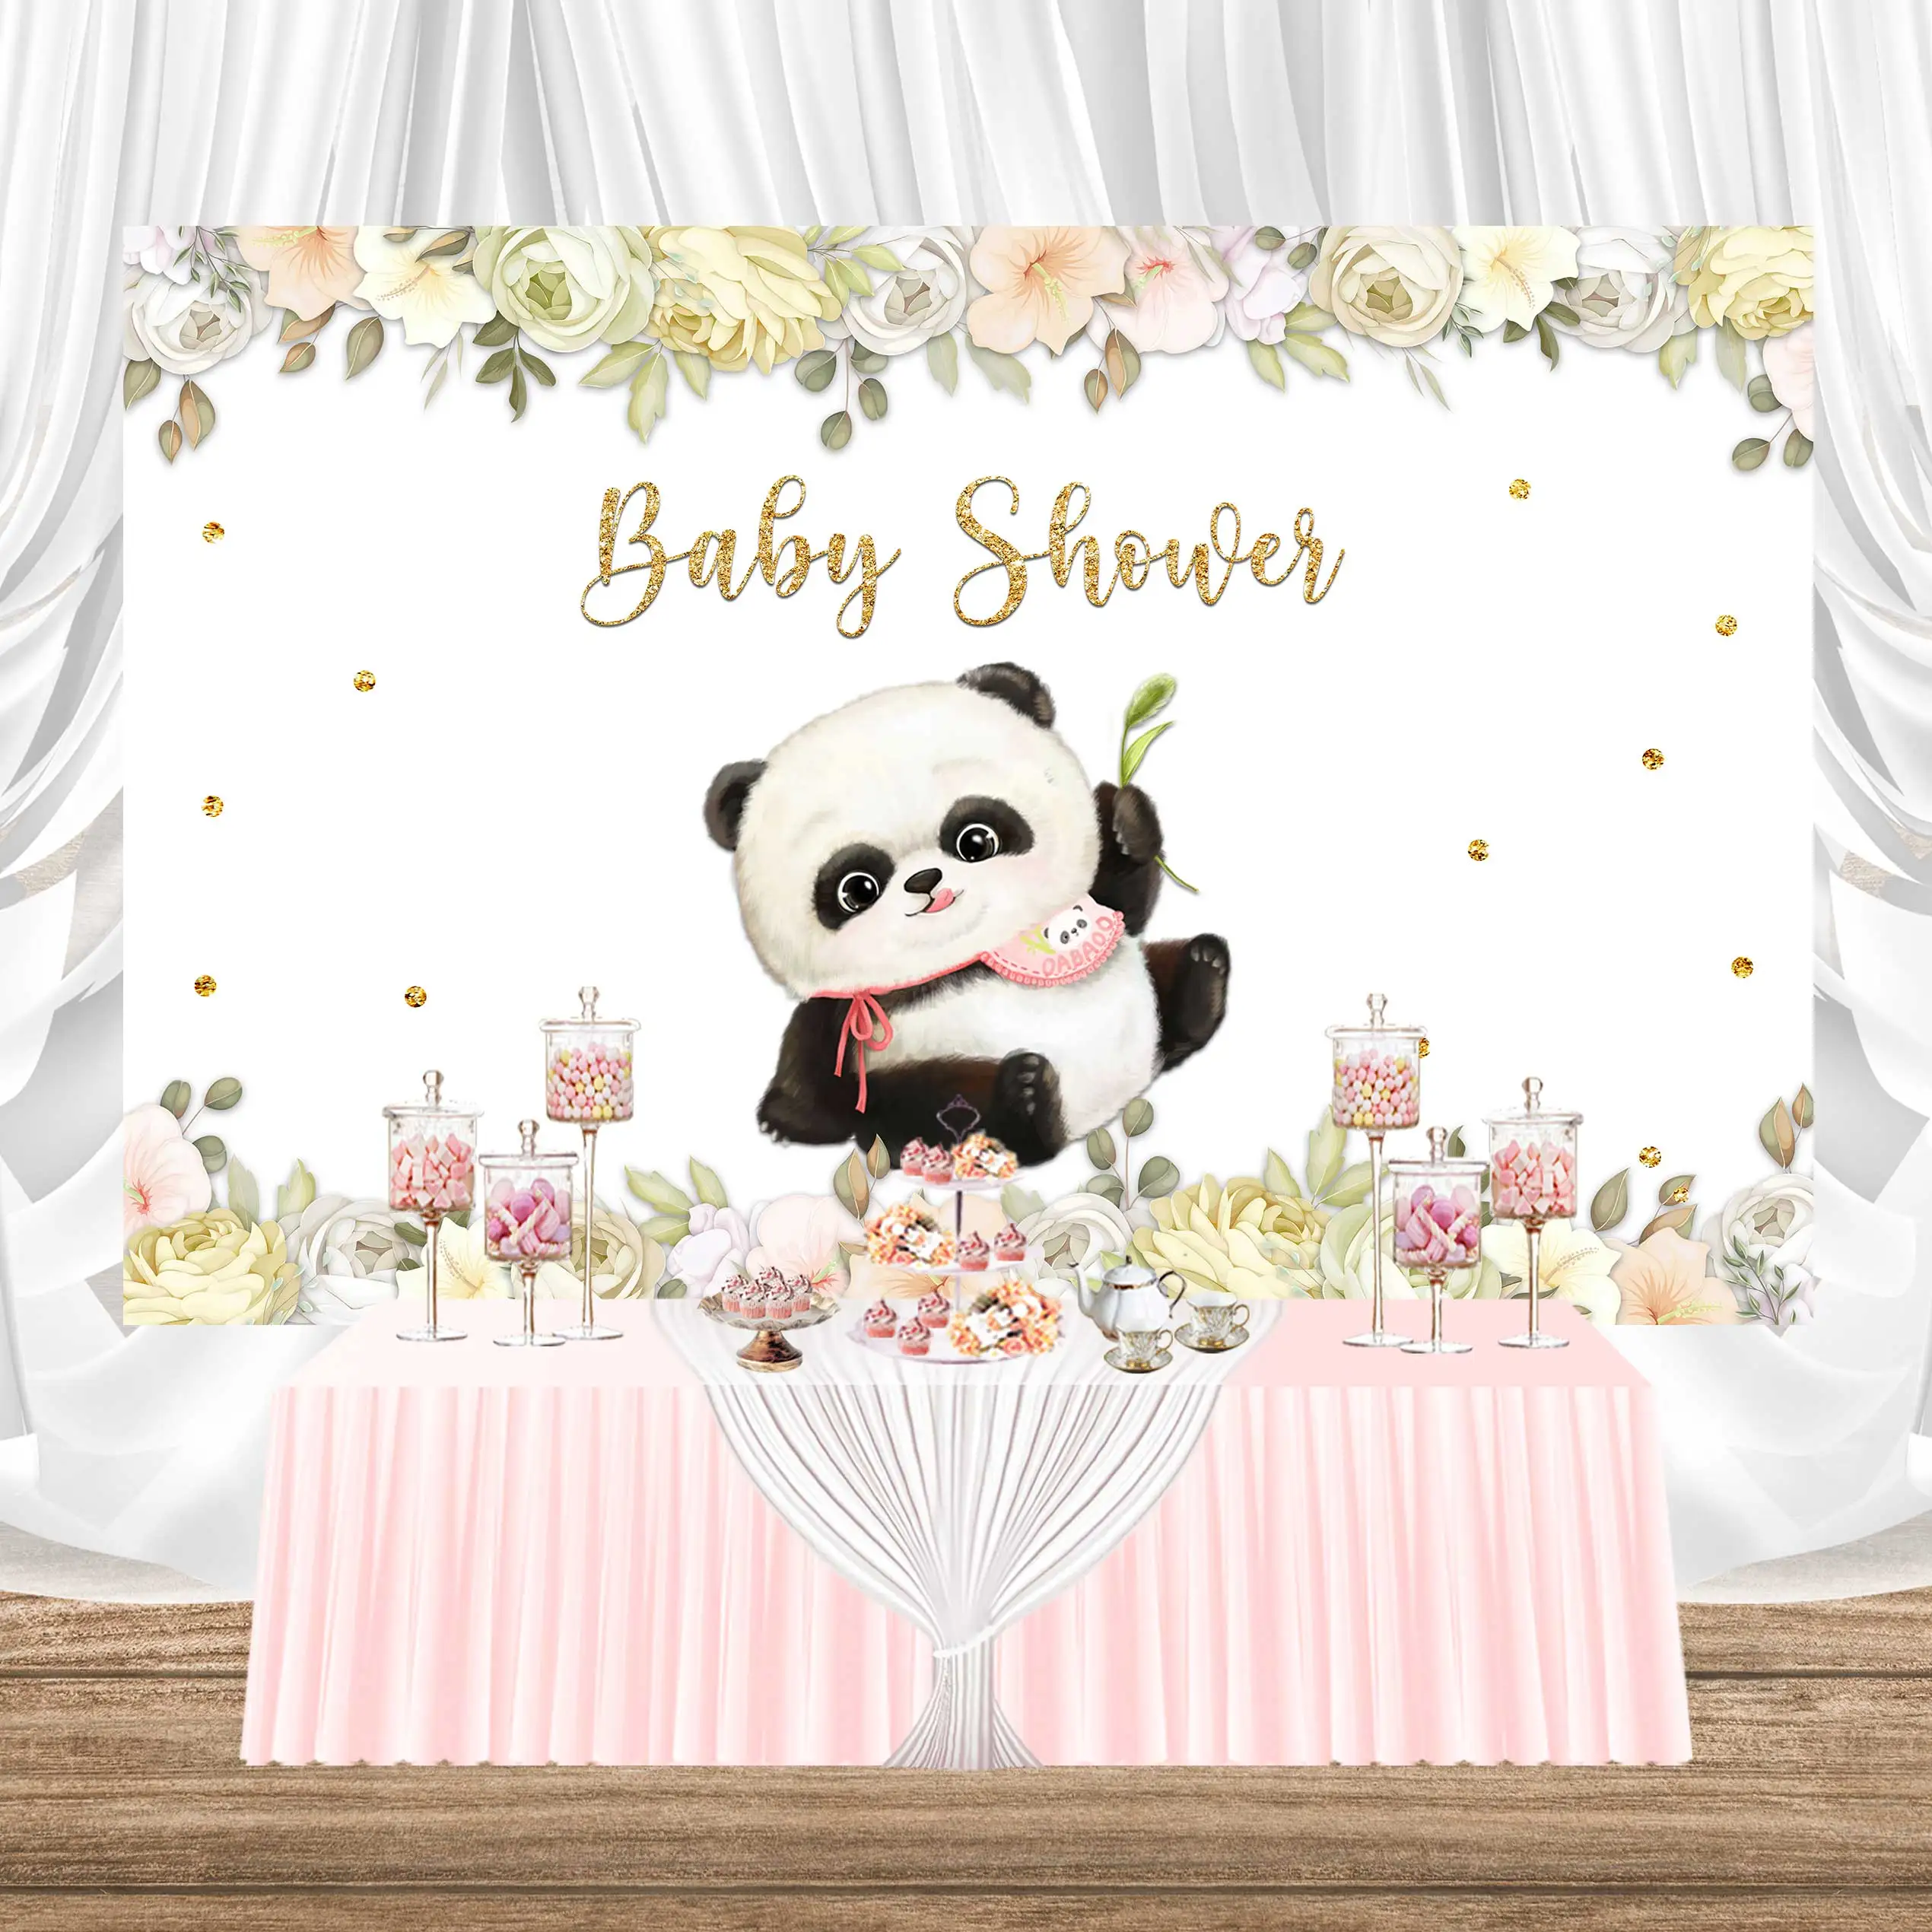 NeoBack Panda Children Backdrop Baby Shower Background Animal Bamboo Cute Flowers Party Photo Backdrop Birthday Photography